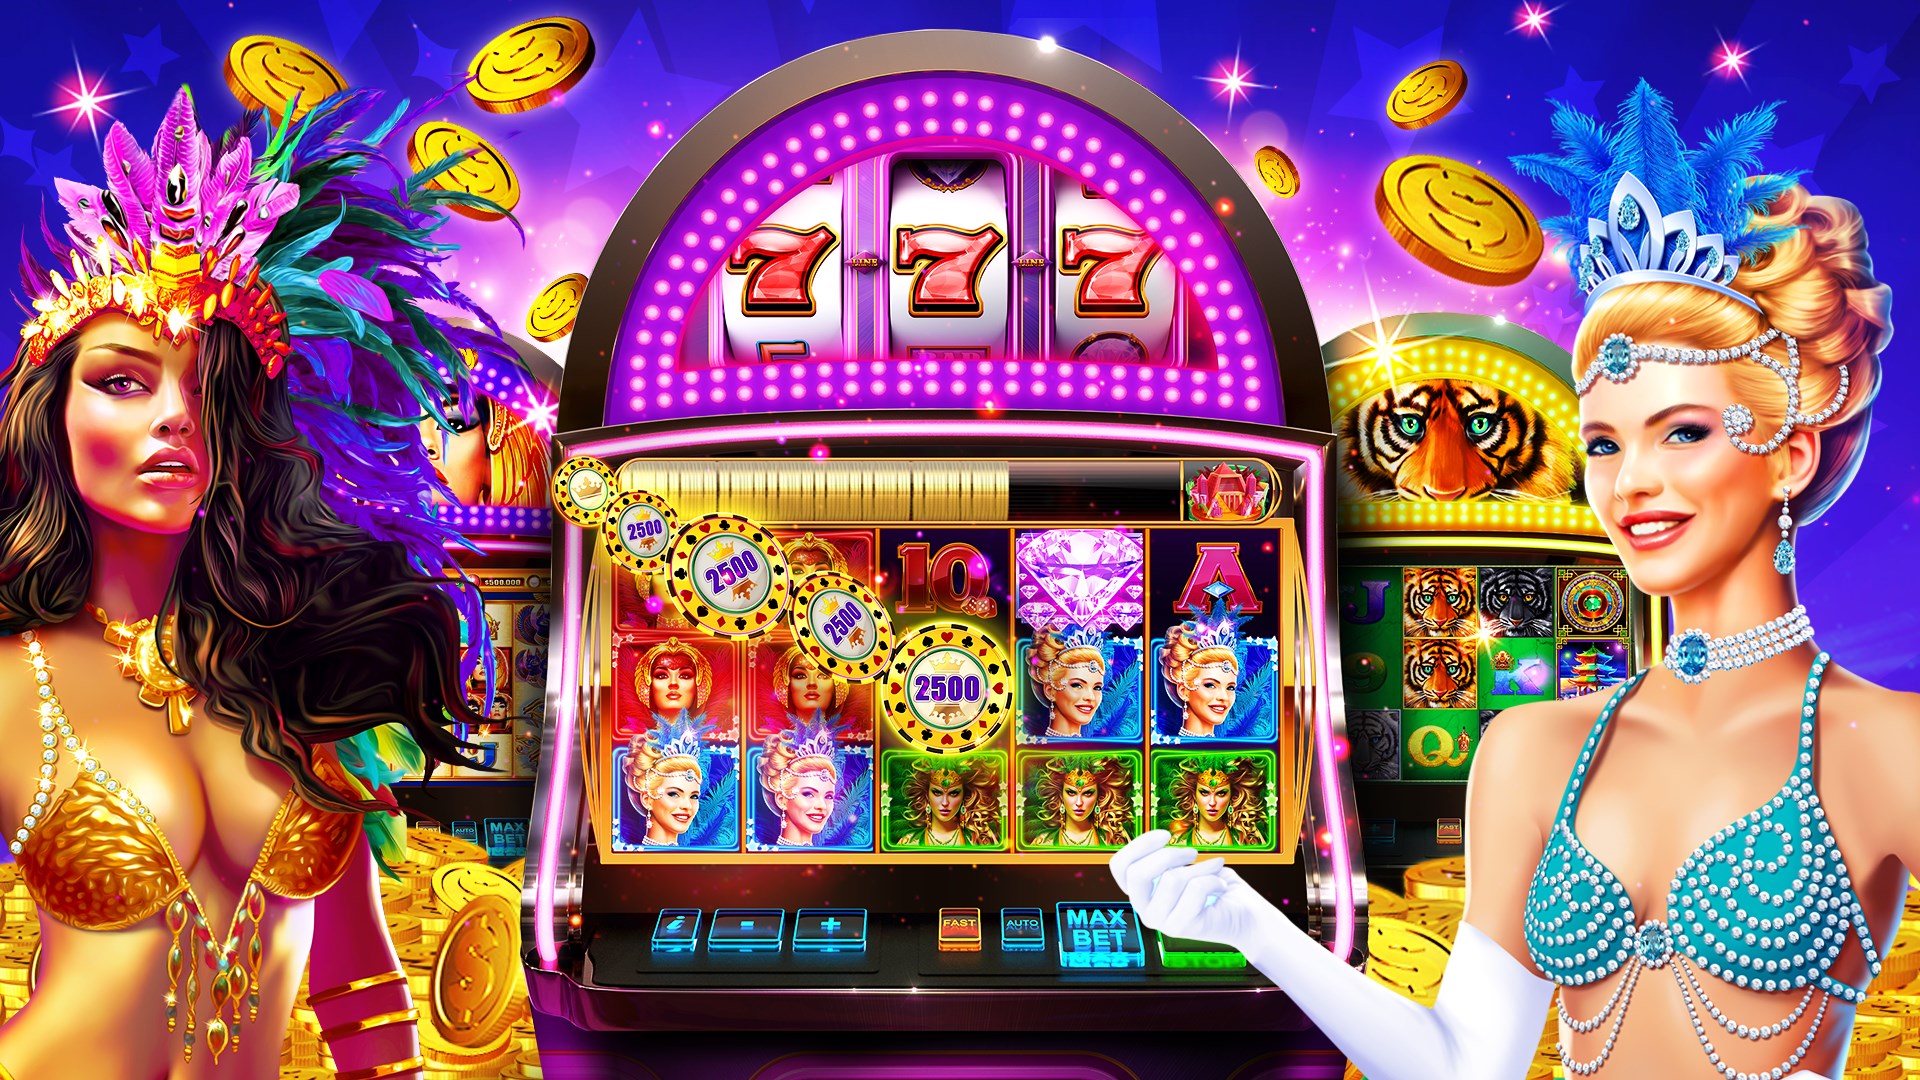 Download Slots - Pharaoh Way (MOD, unlimited money) Apk for Android